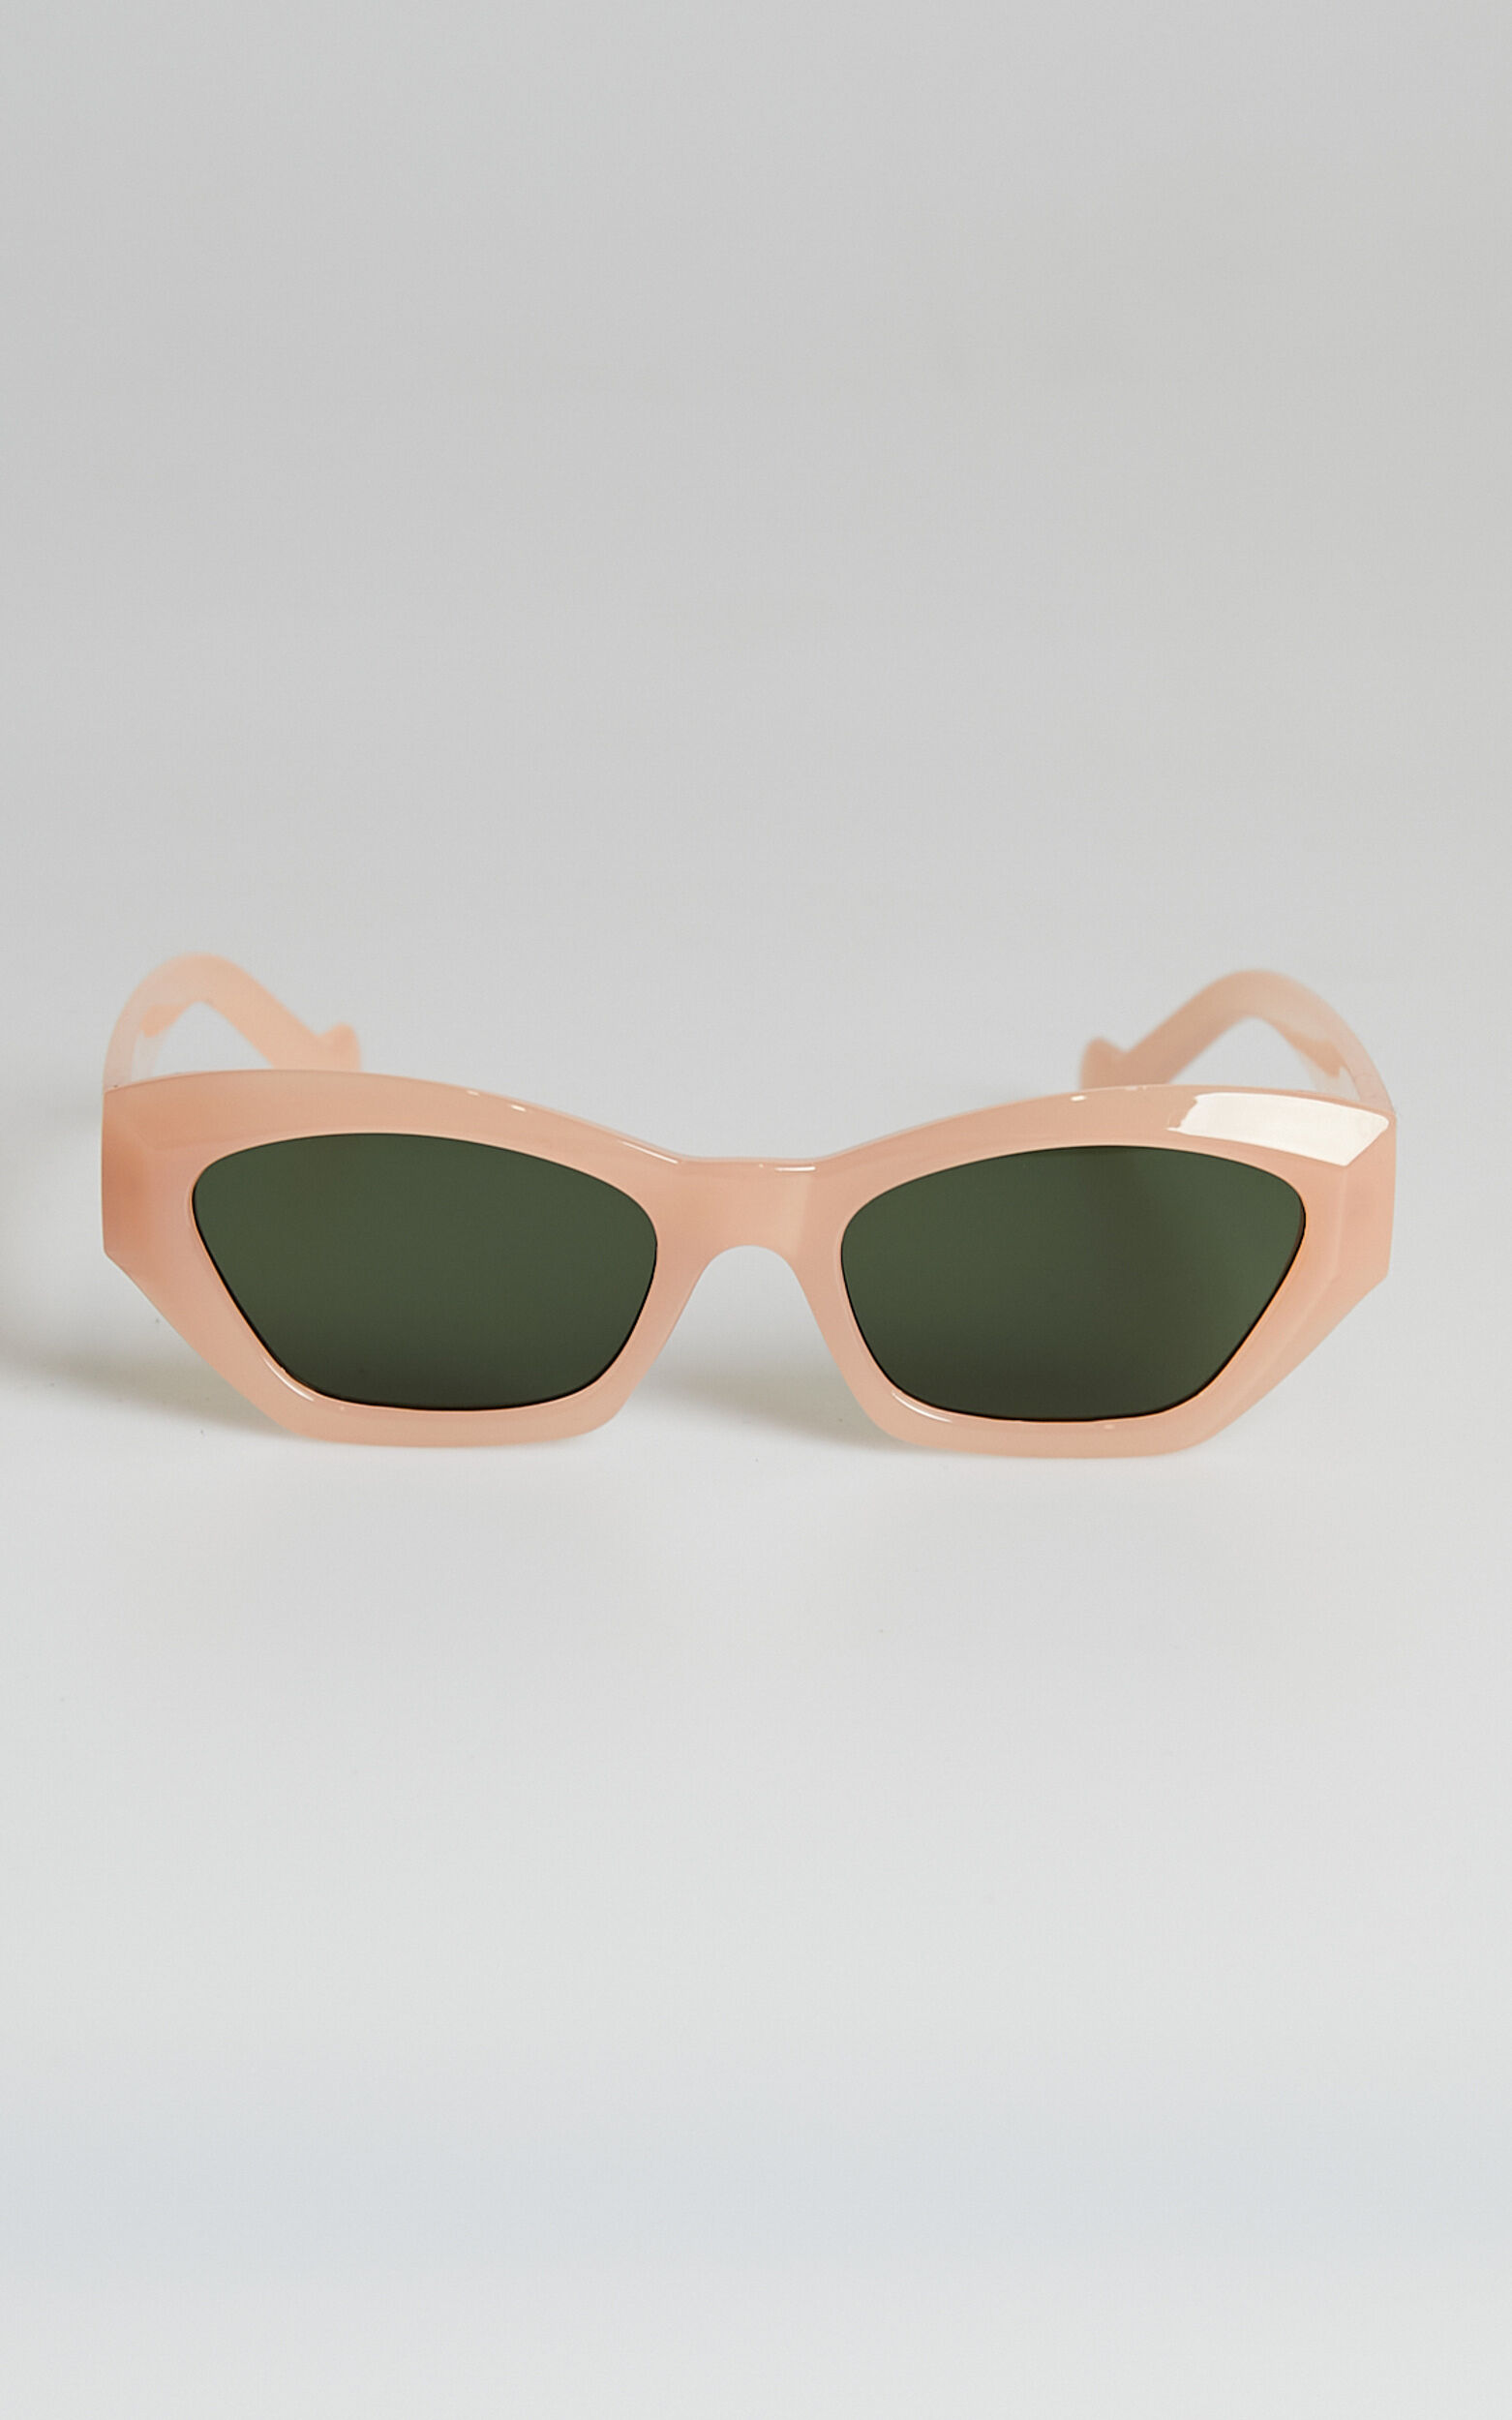 Lively Sunglasses in Nude - NoSize, BRN2, super-hi-res image number null